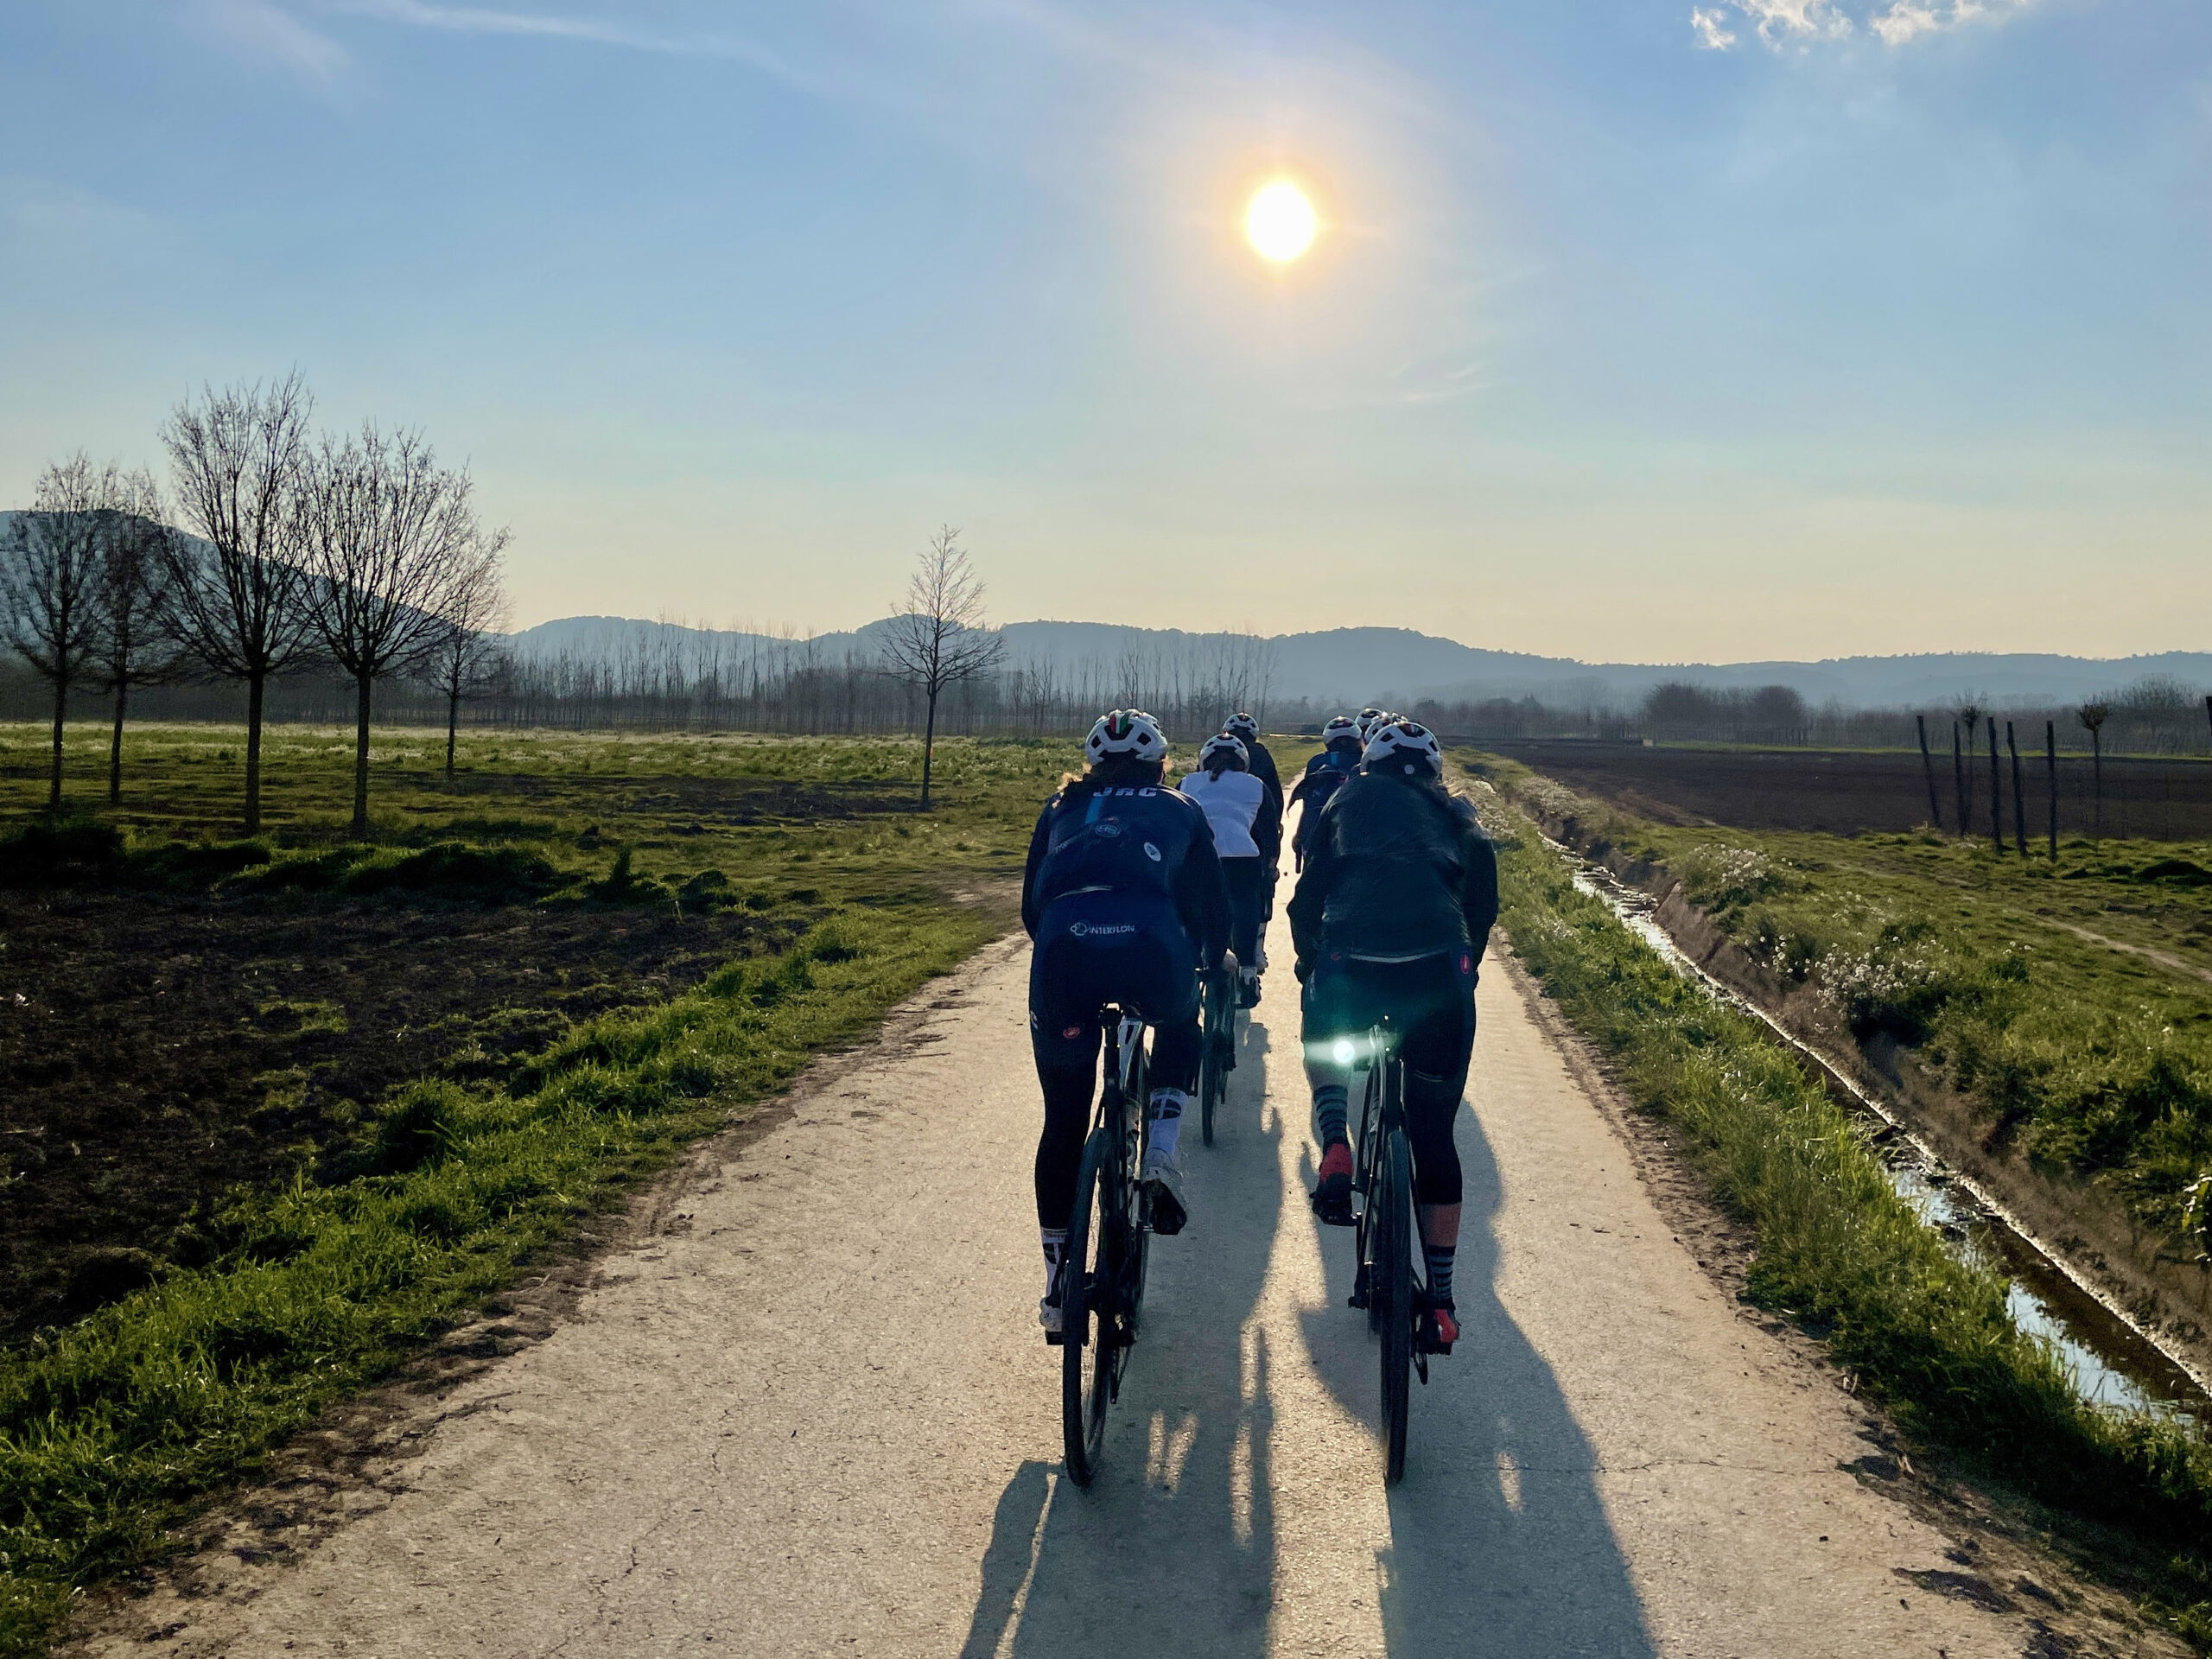 A team rides away from the camera on a dirt road in the Girona countryside.